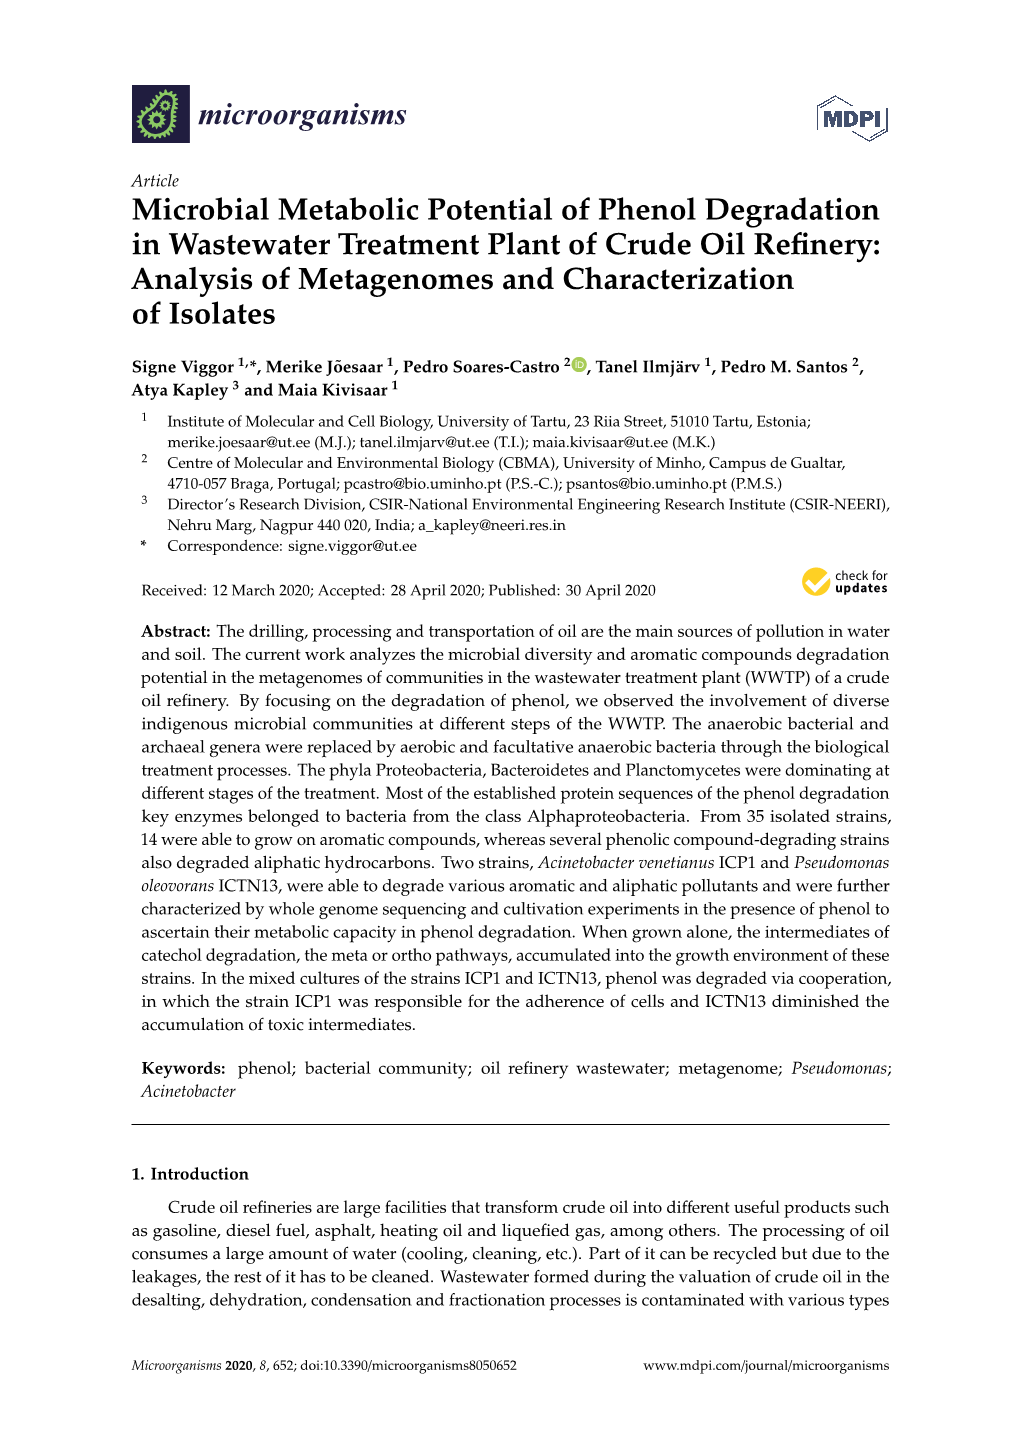 Microbial Metabolic Potential of Phenol Degradation in Wastewater Treatment Plant of Crude Oil Reﬁnery: Analysis of Metagenomes and Characterization of Isolates